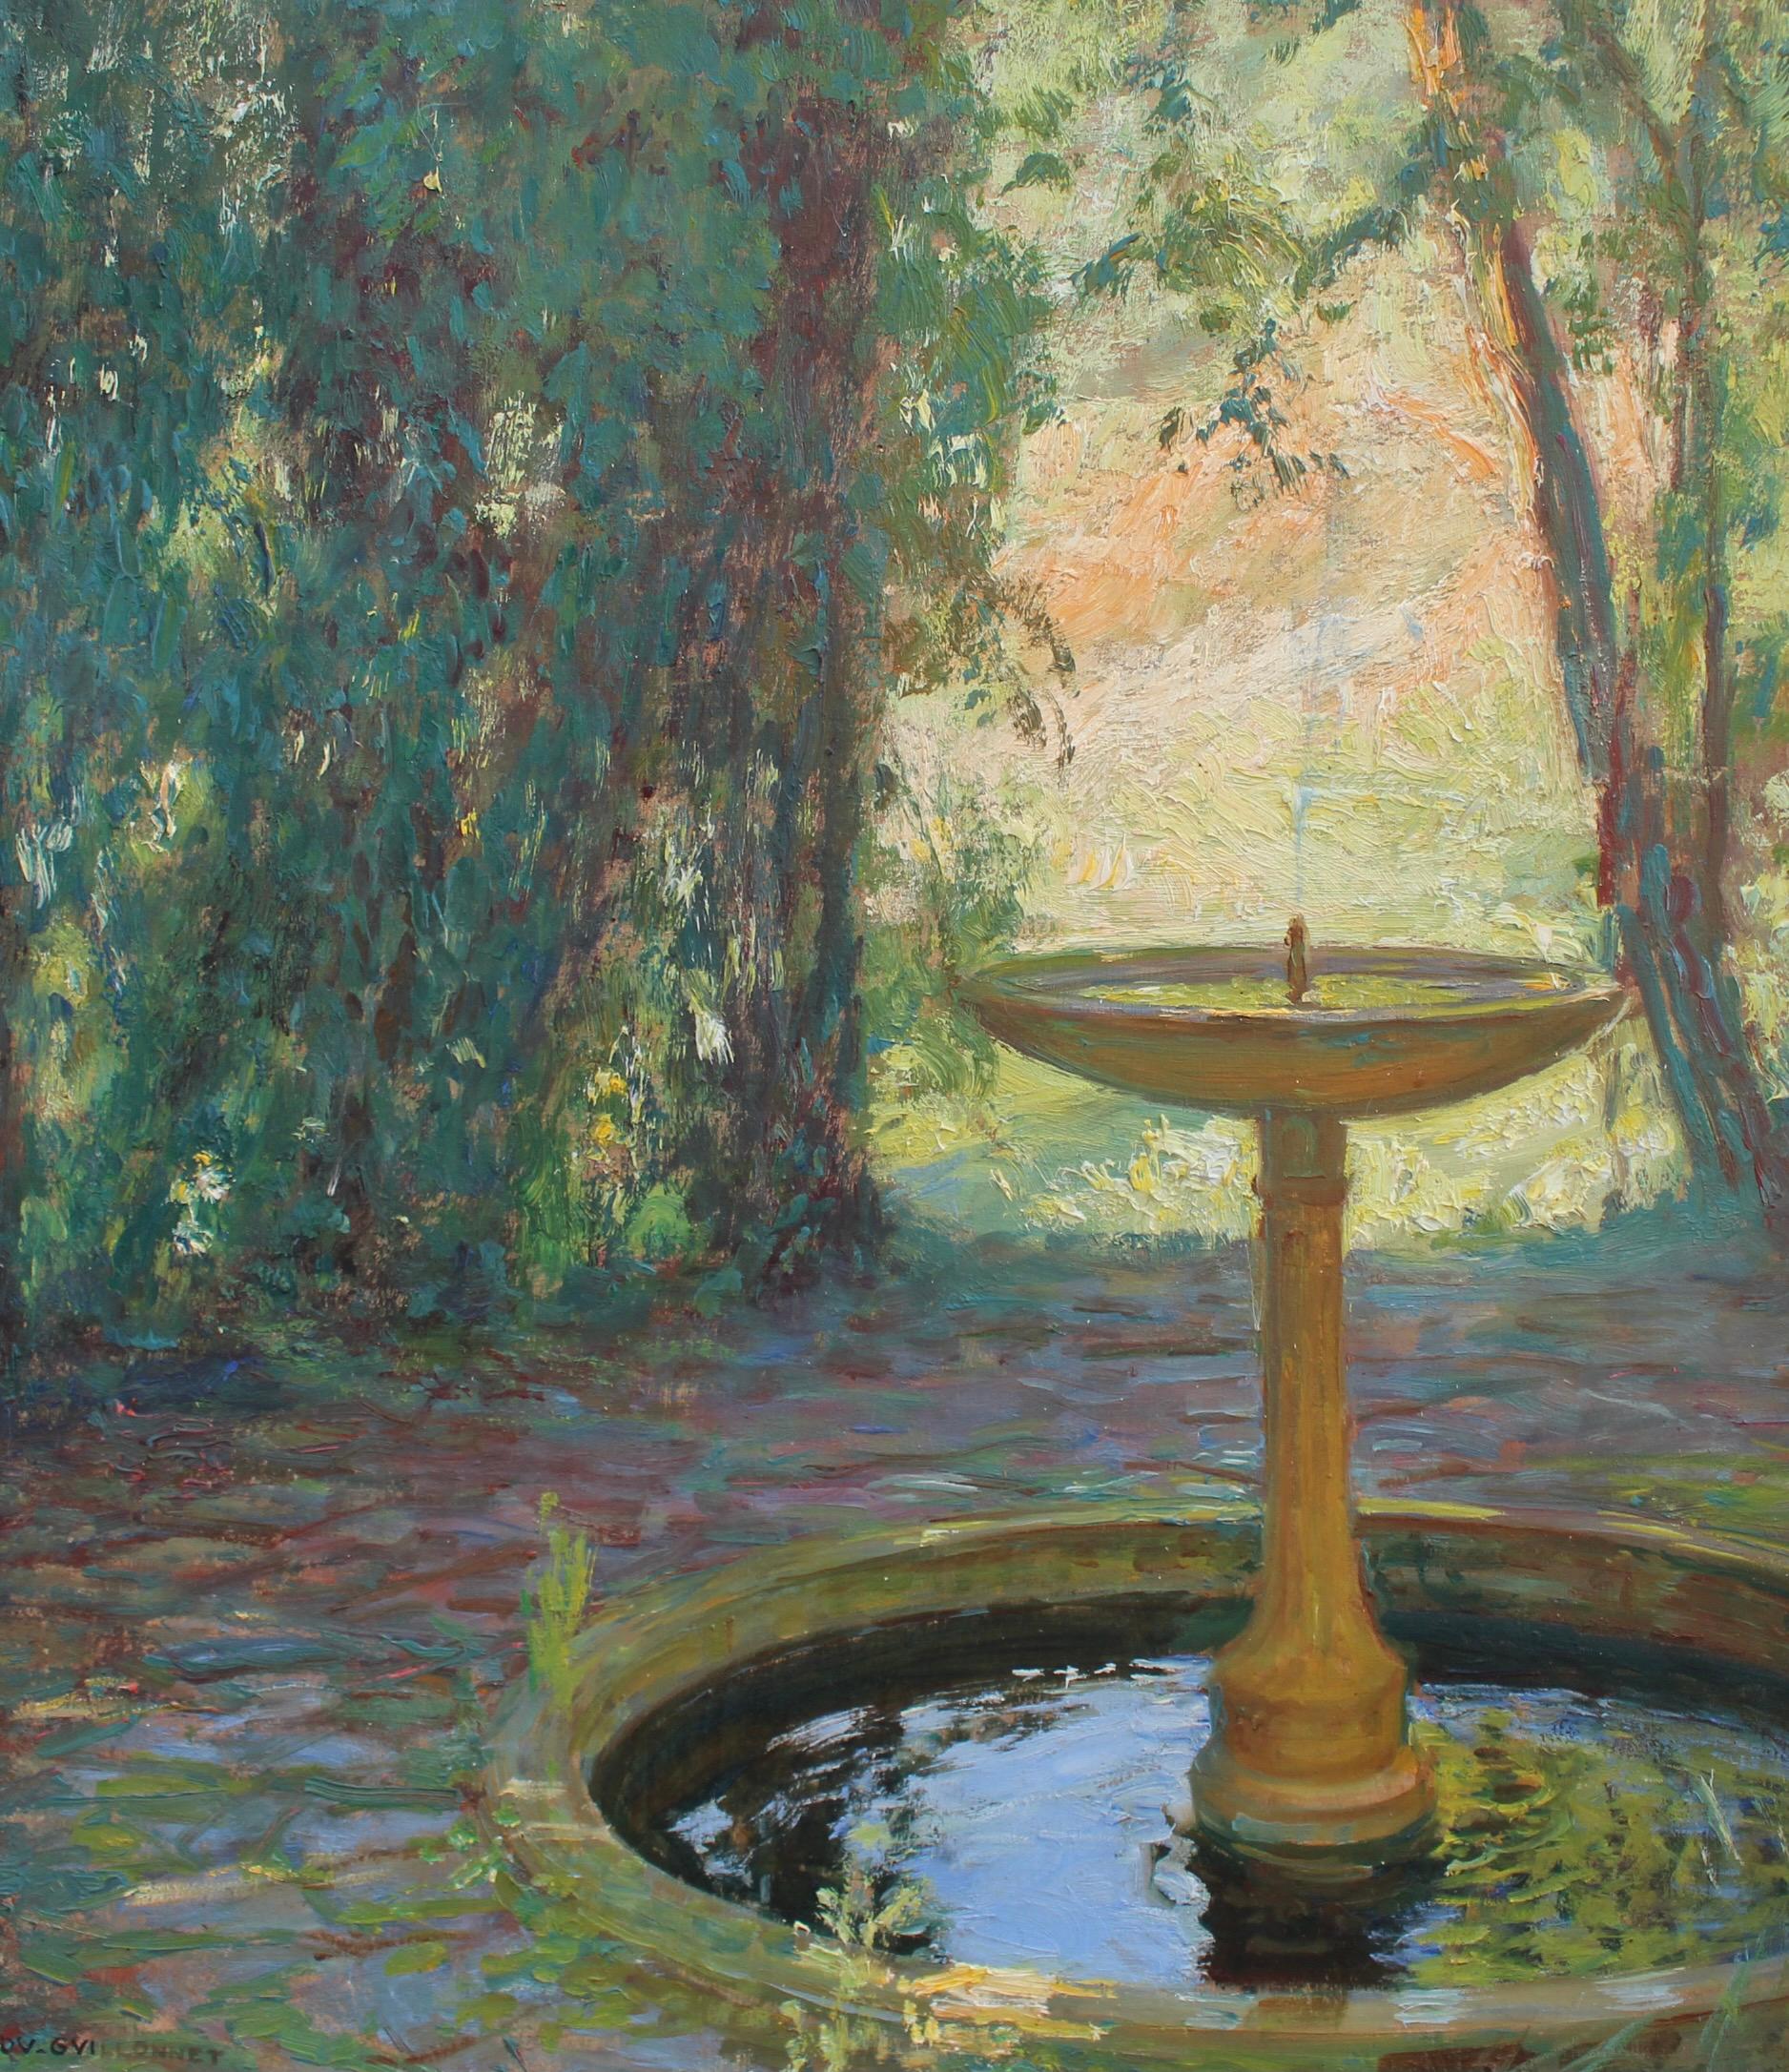 'Fountain in a Park', oil on board, by Octave-Denis-Victor Guillonnet (circa 1930s). Light peeks through the opening in the park's foliage reflecting back in the small fountain pool. The artist's keen eye for colour and detail combined with his use